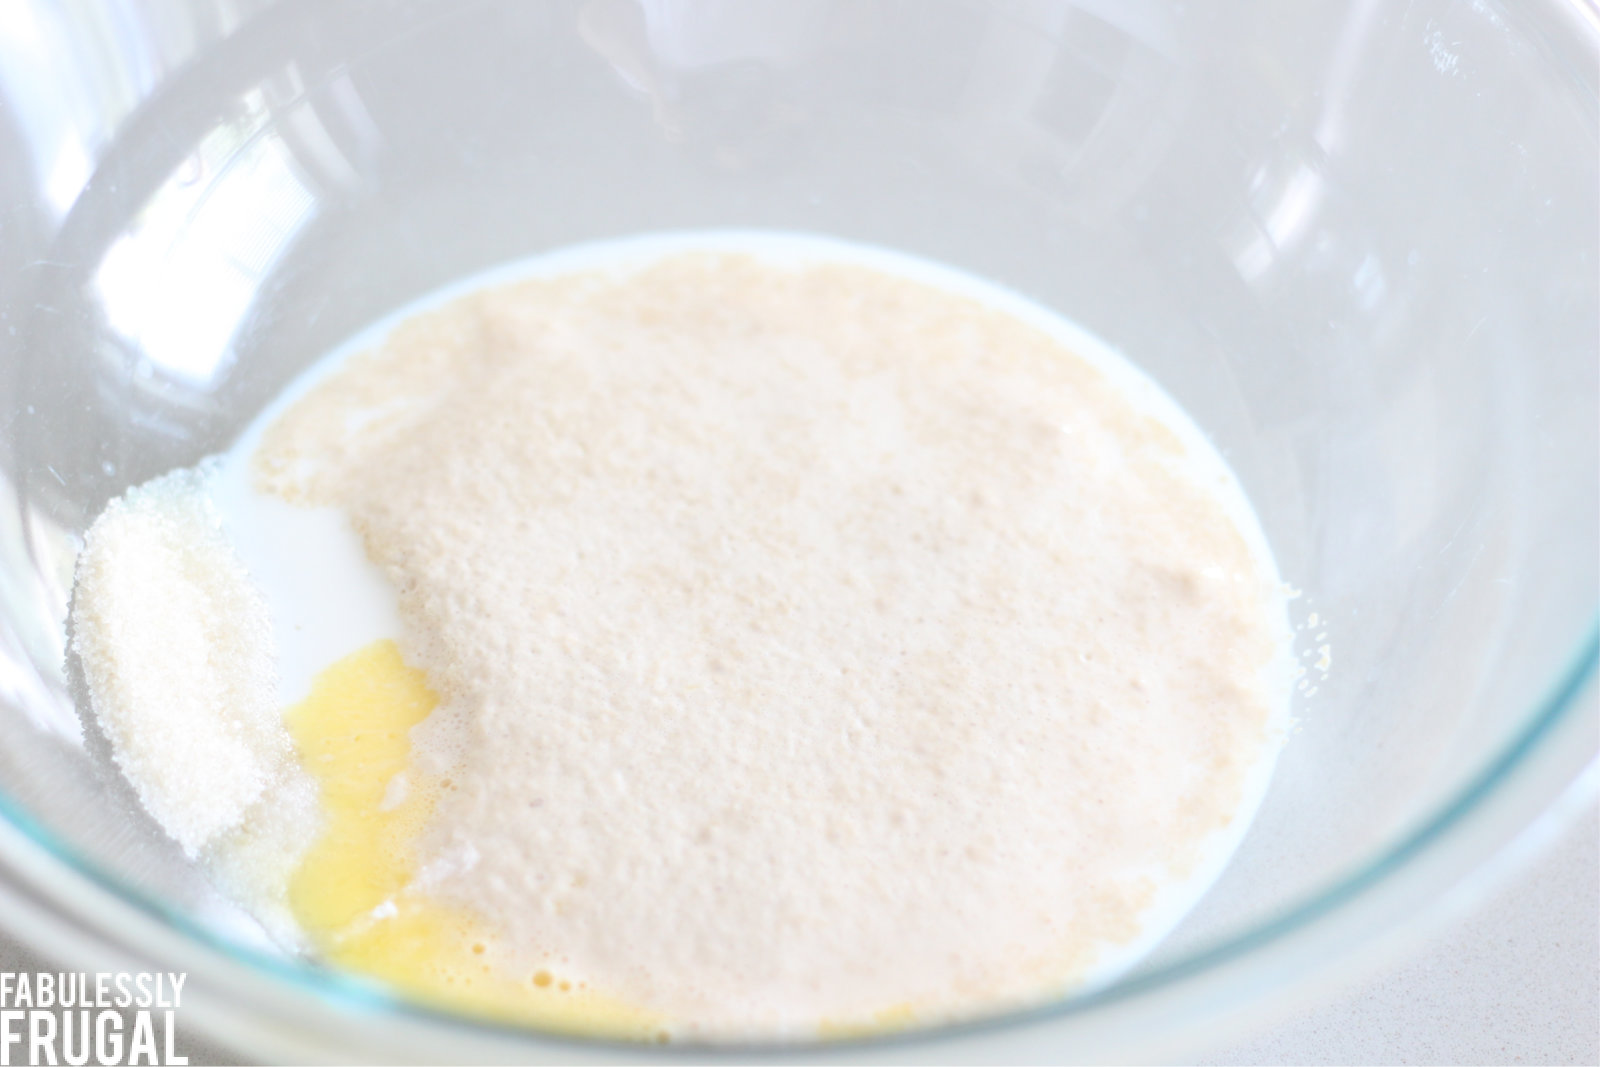 Egg sugar and salt added to yeast mix